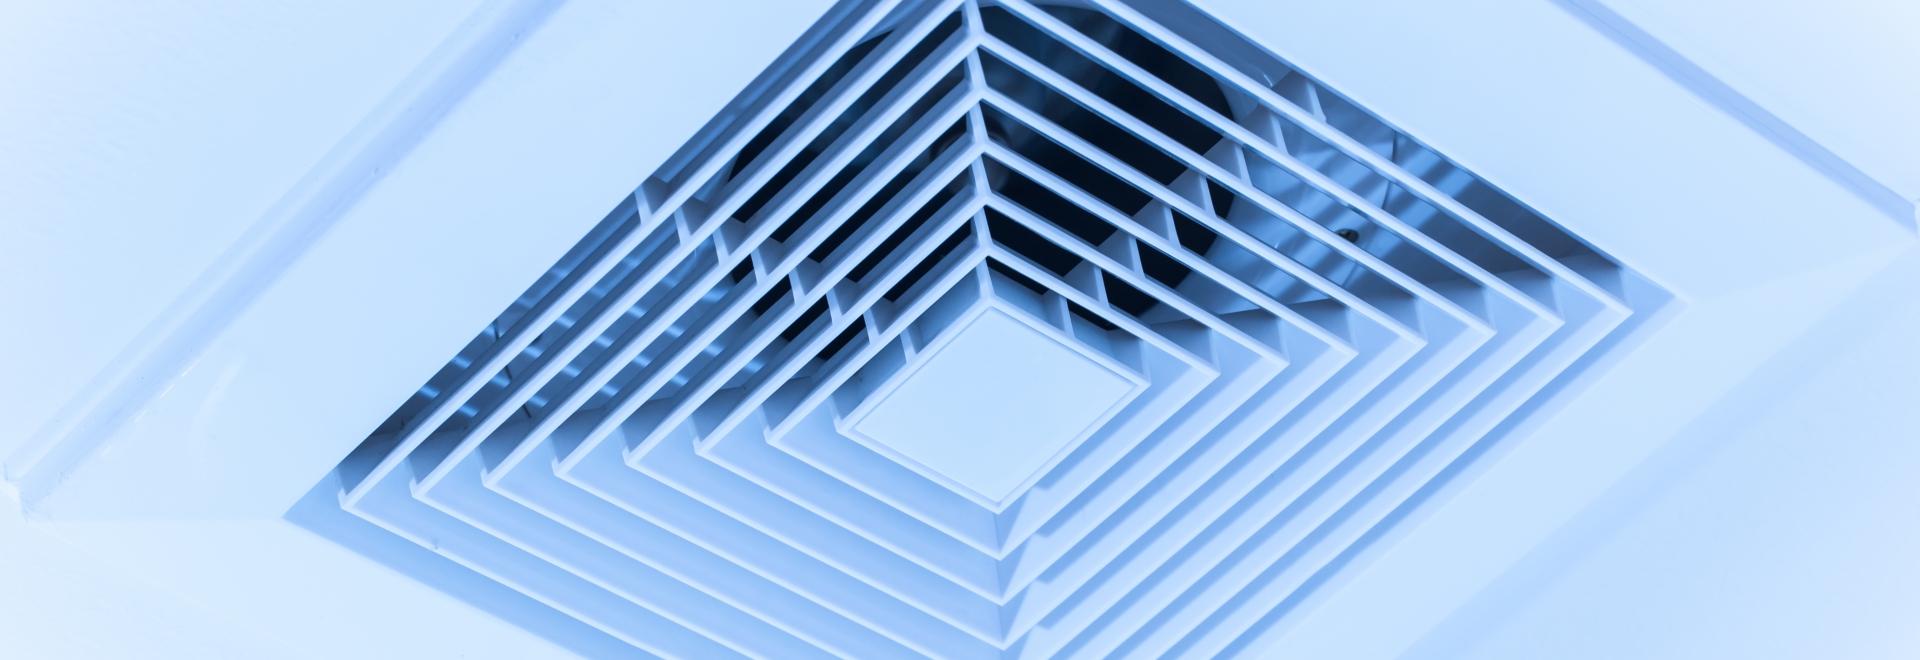 Duct Vent In The Ceiling